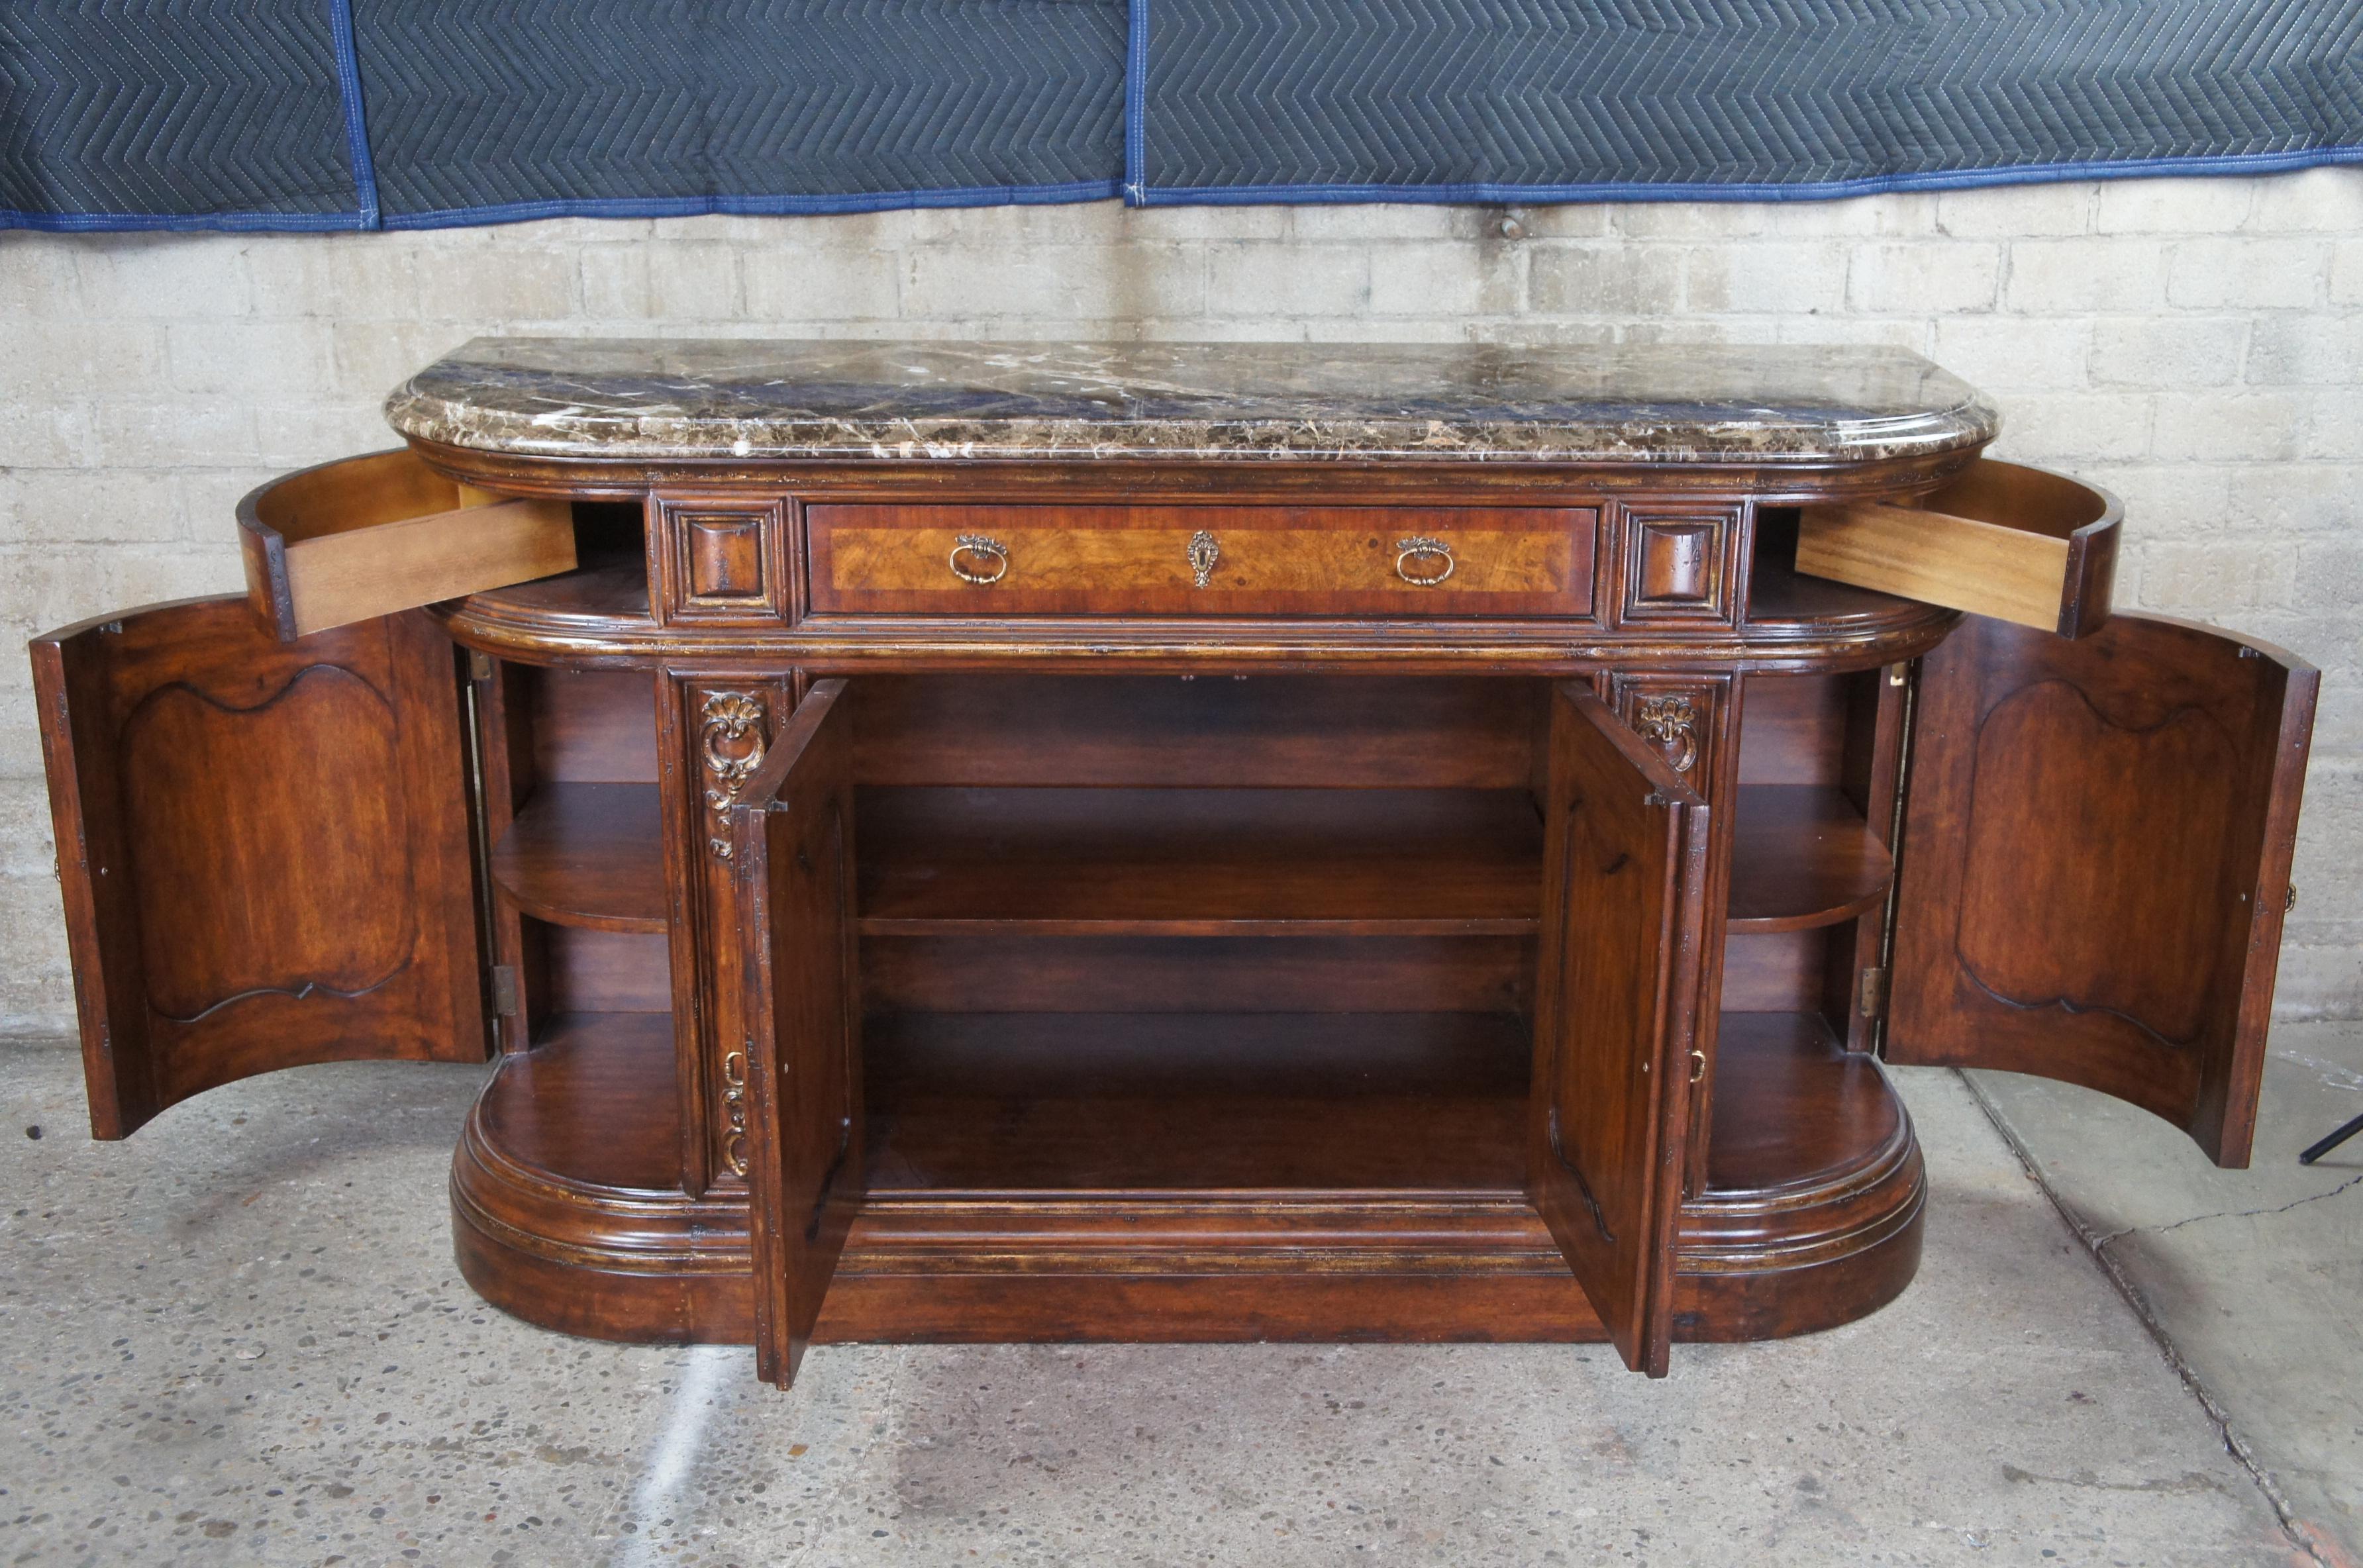 20th Century Marge Carson French Baroque Marble Top Buffet Console Sideboard Credenza